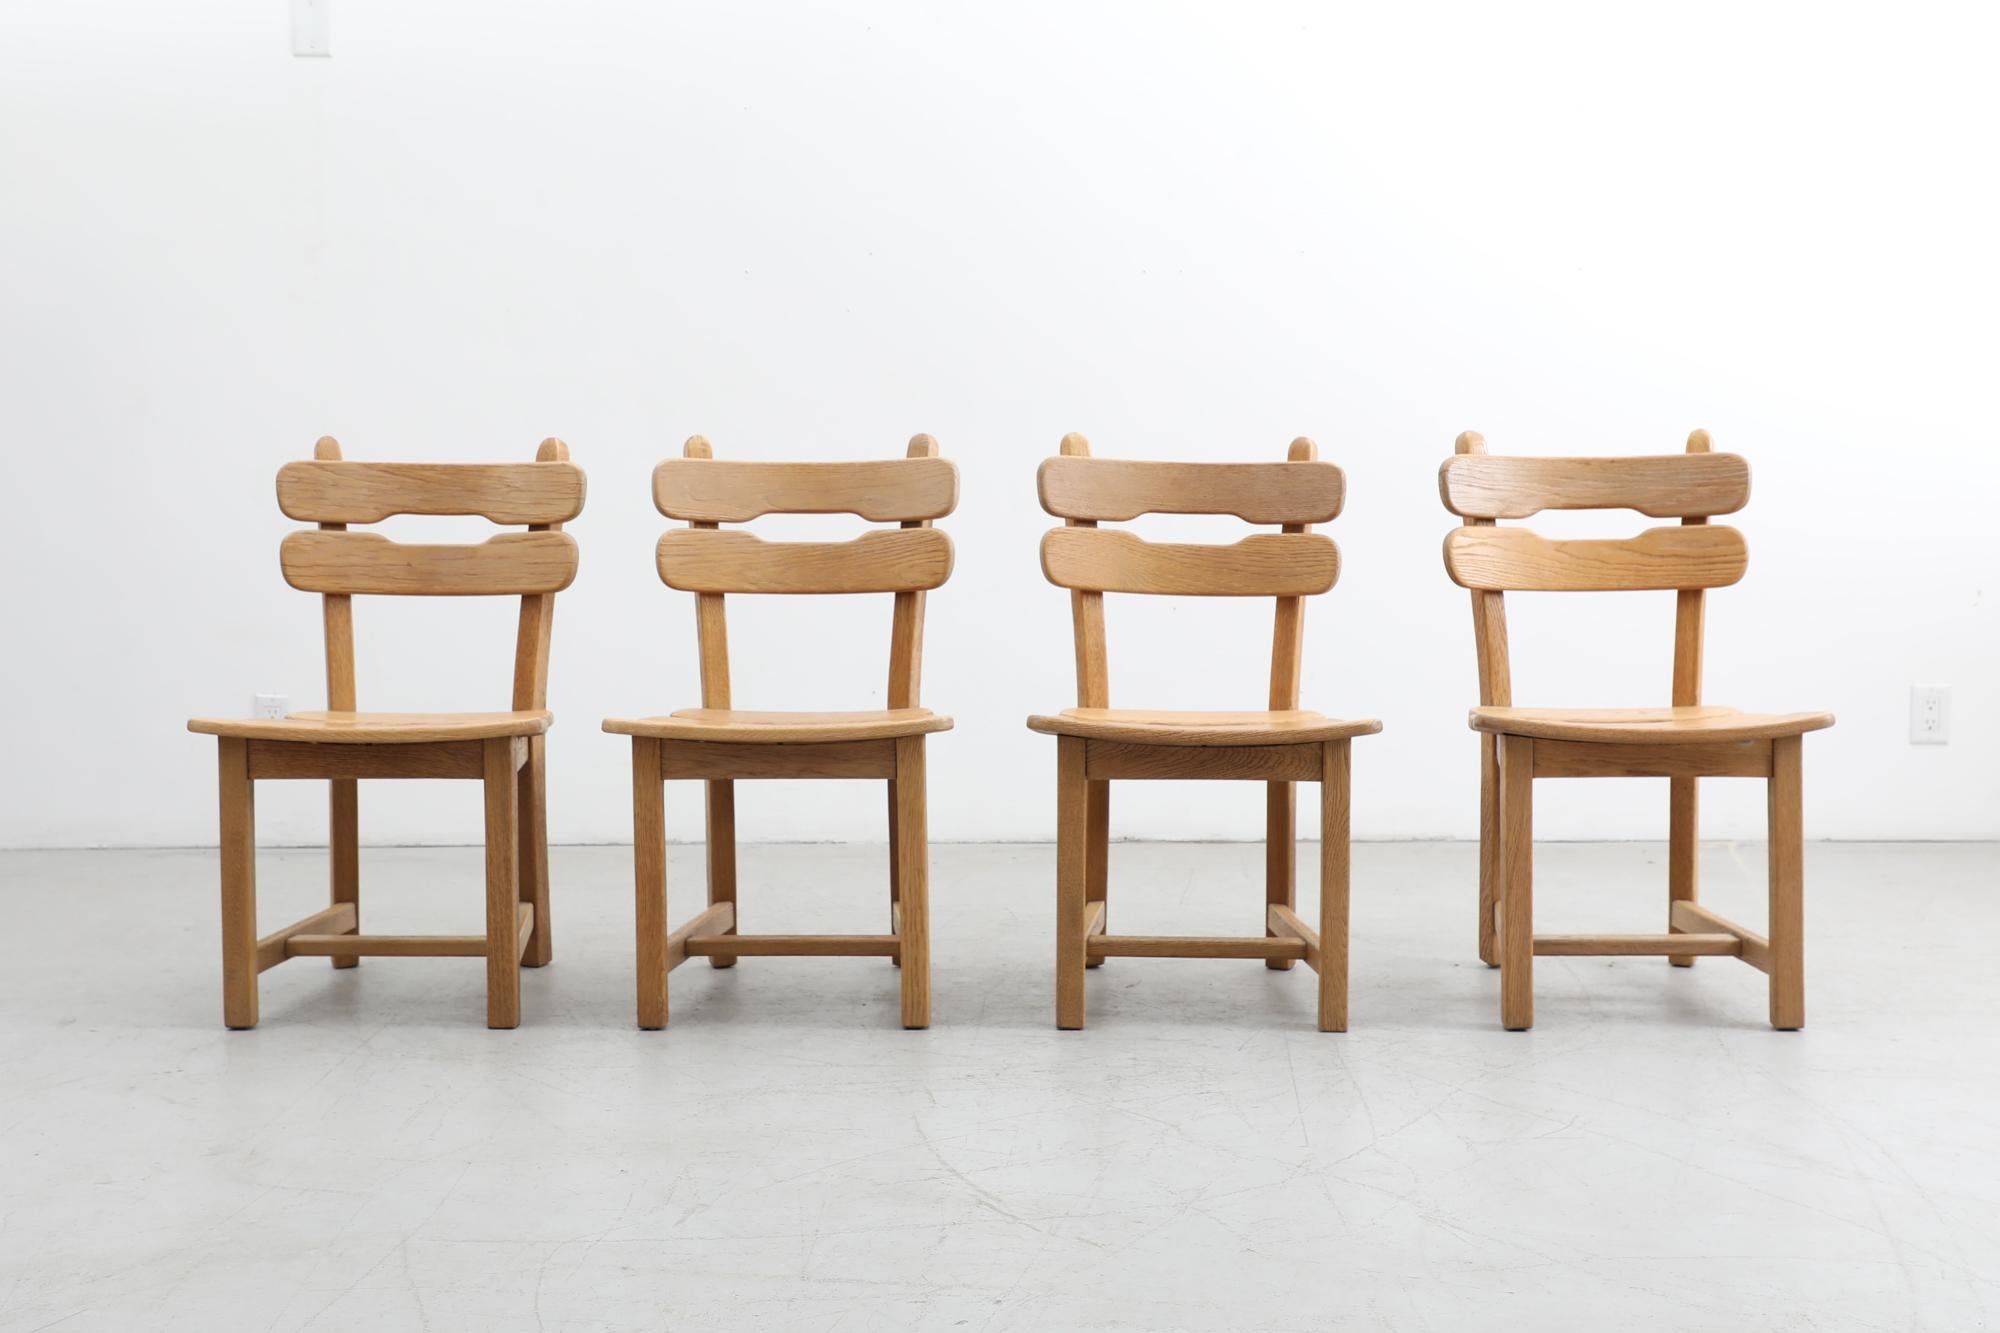 Set of 4 Brutalist Belgian light oak dining chairs with slatted seats and backrests. In good condition with some wear consistent with their age and use. Other similar seating is available and listed separately (LU922432022122).